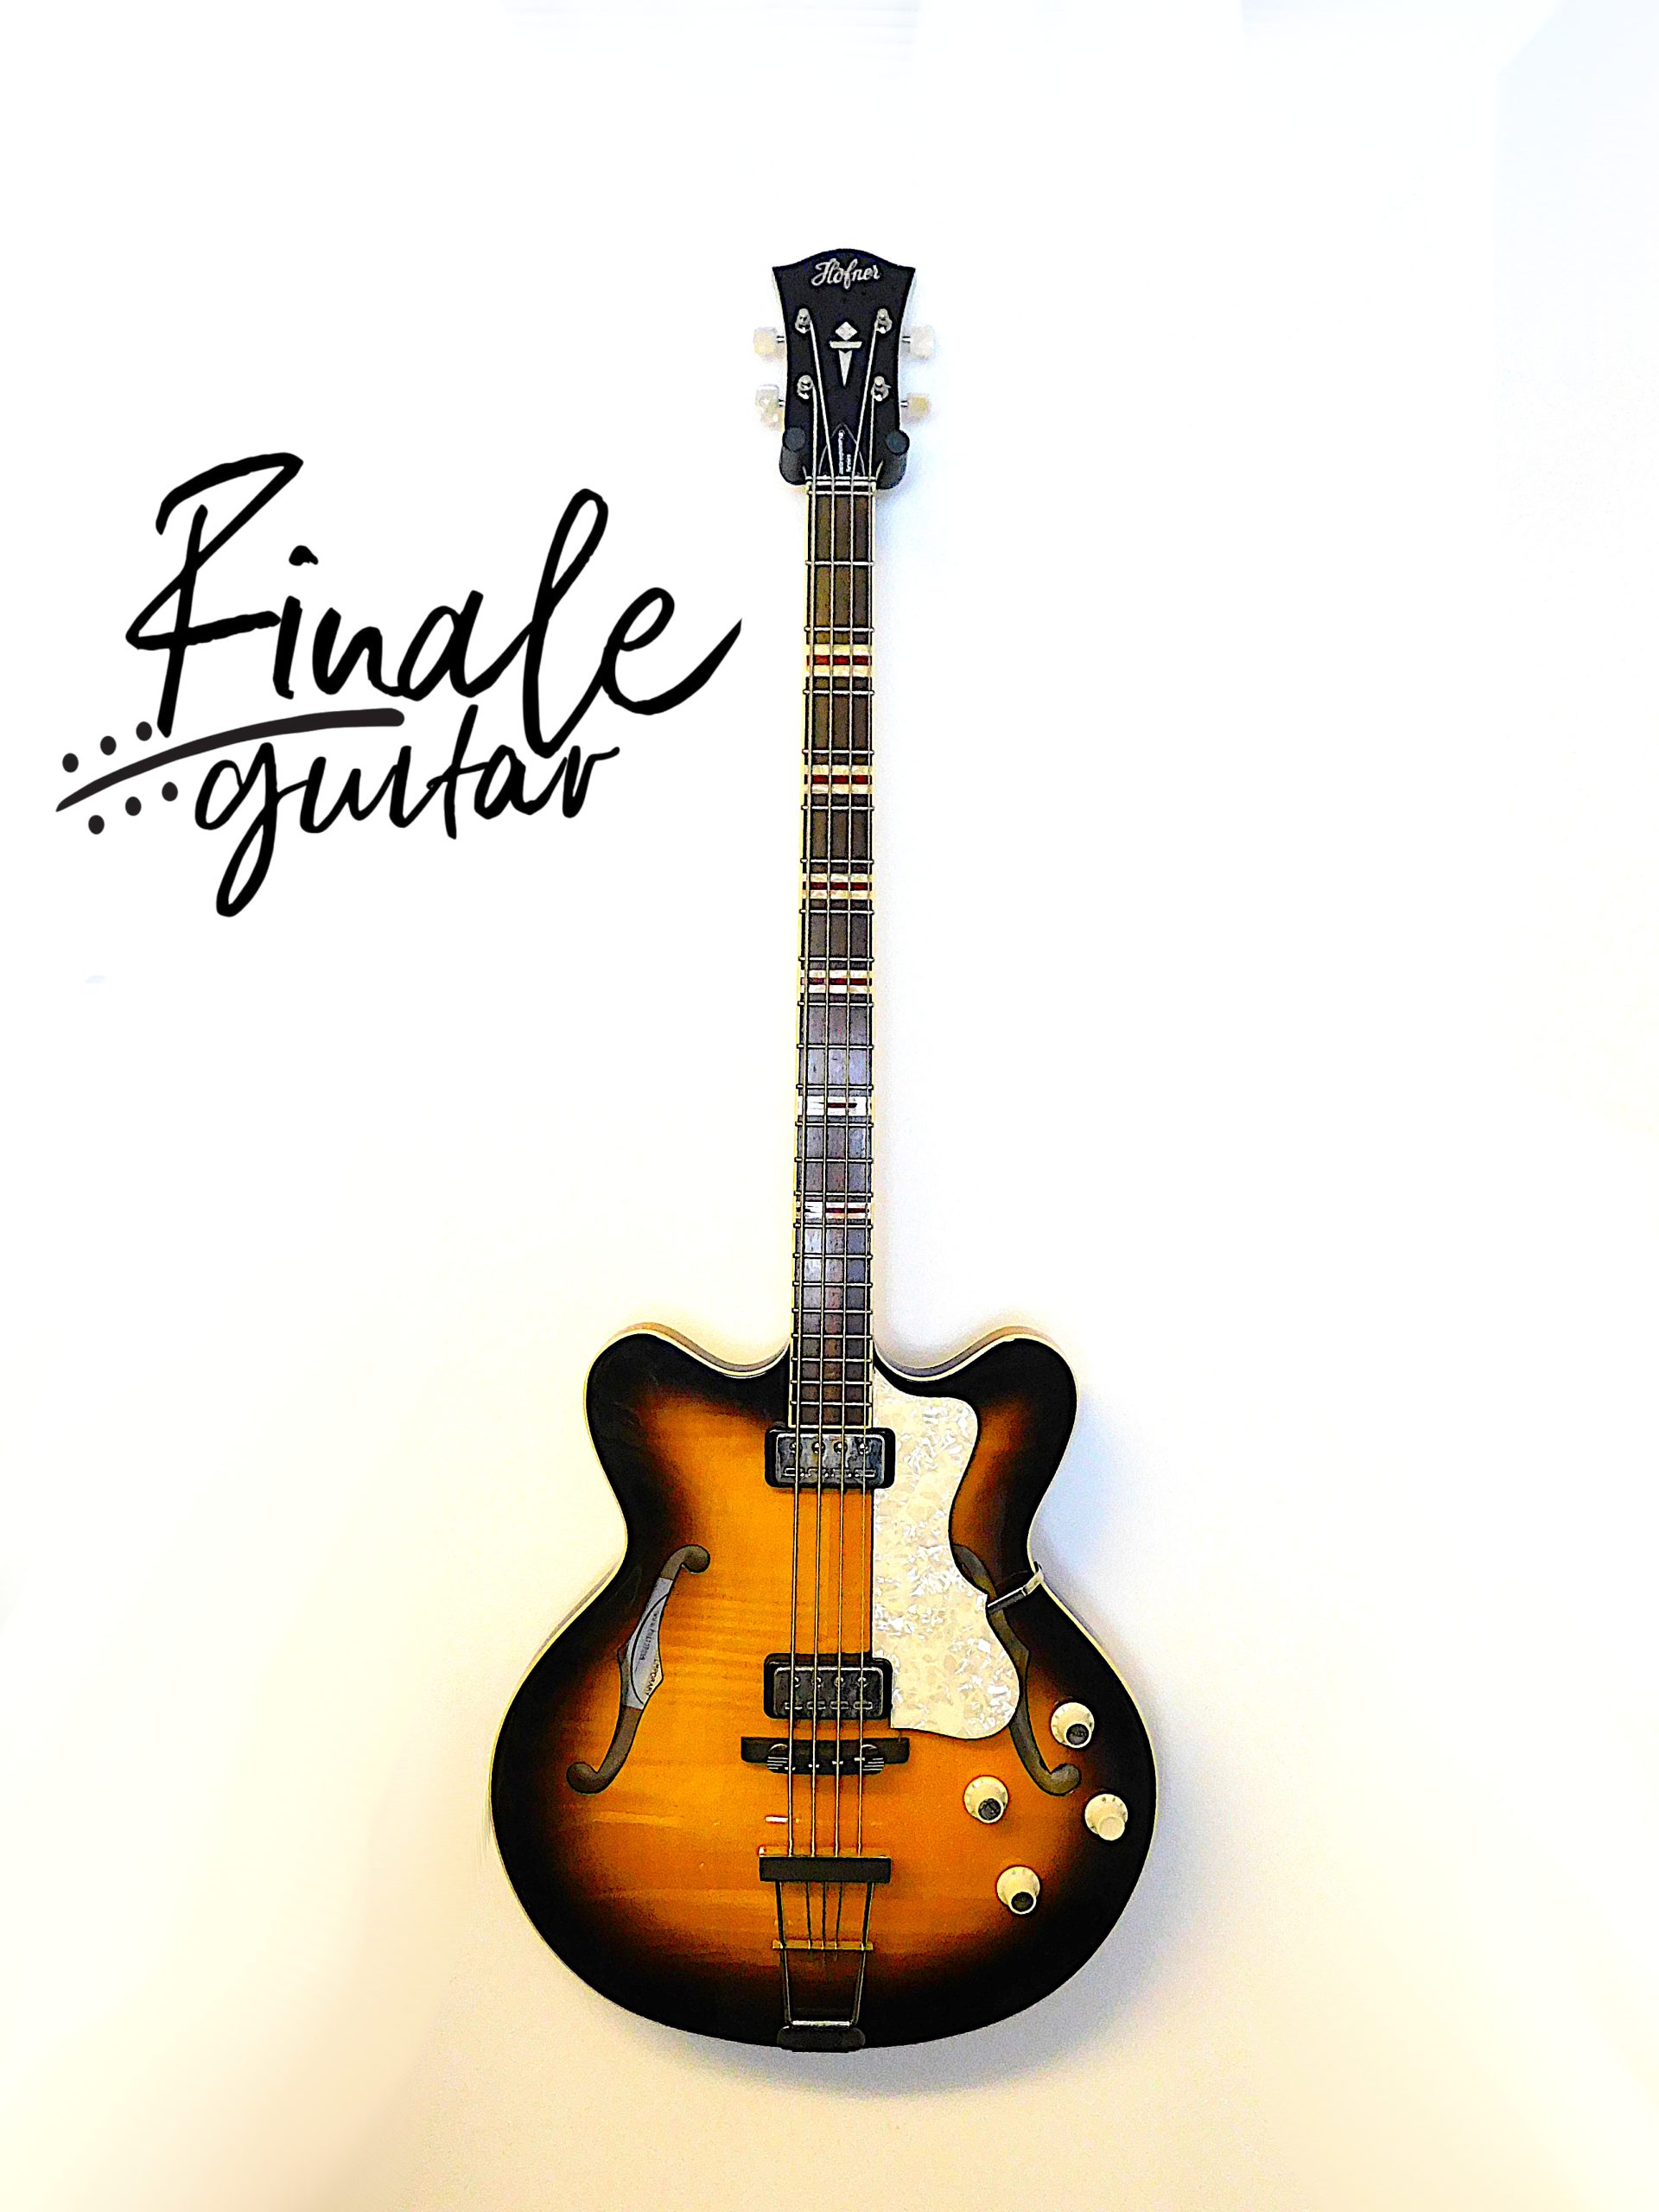 Hofner Verythin 500/7 Contemporary bass (semi-hollow) for sale in our Sheffield guitar shop, Finale Guitar